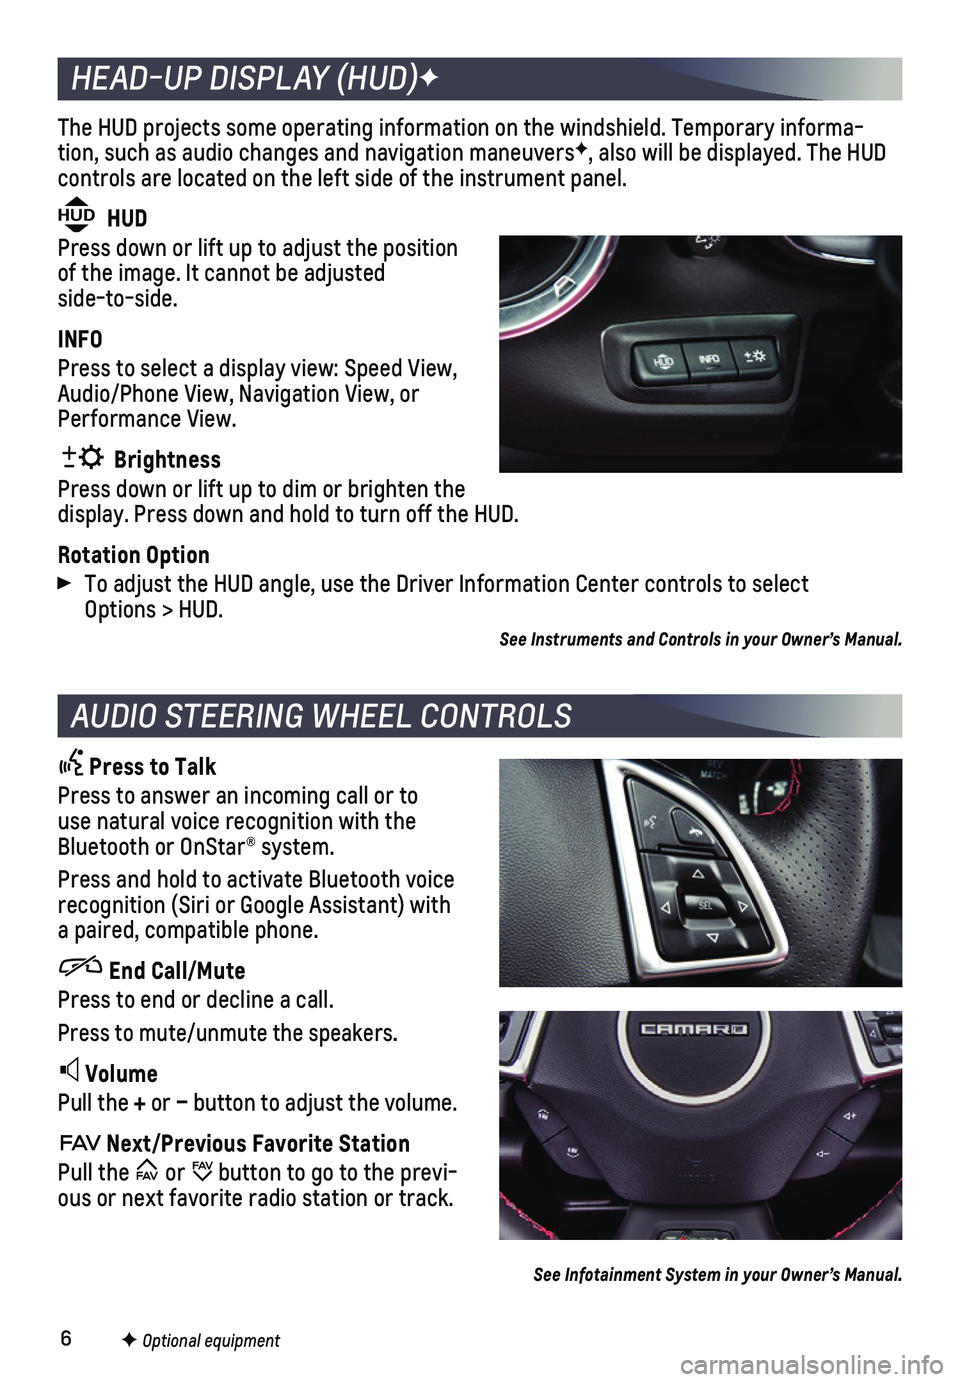 CHEVROLET CAMARO 2021  Get To Know Guide 6
The HUD projects some operating information on the windshield. Temporary\
 informa-tion, such as audio changes and navigation maneuversF, also will be  displayed. The HUD  
controls are located on t